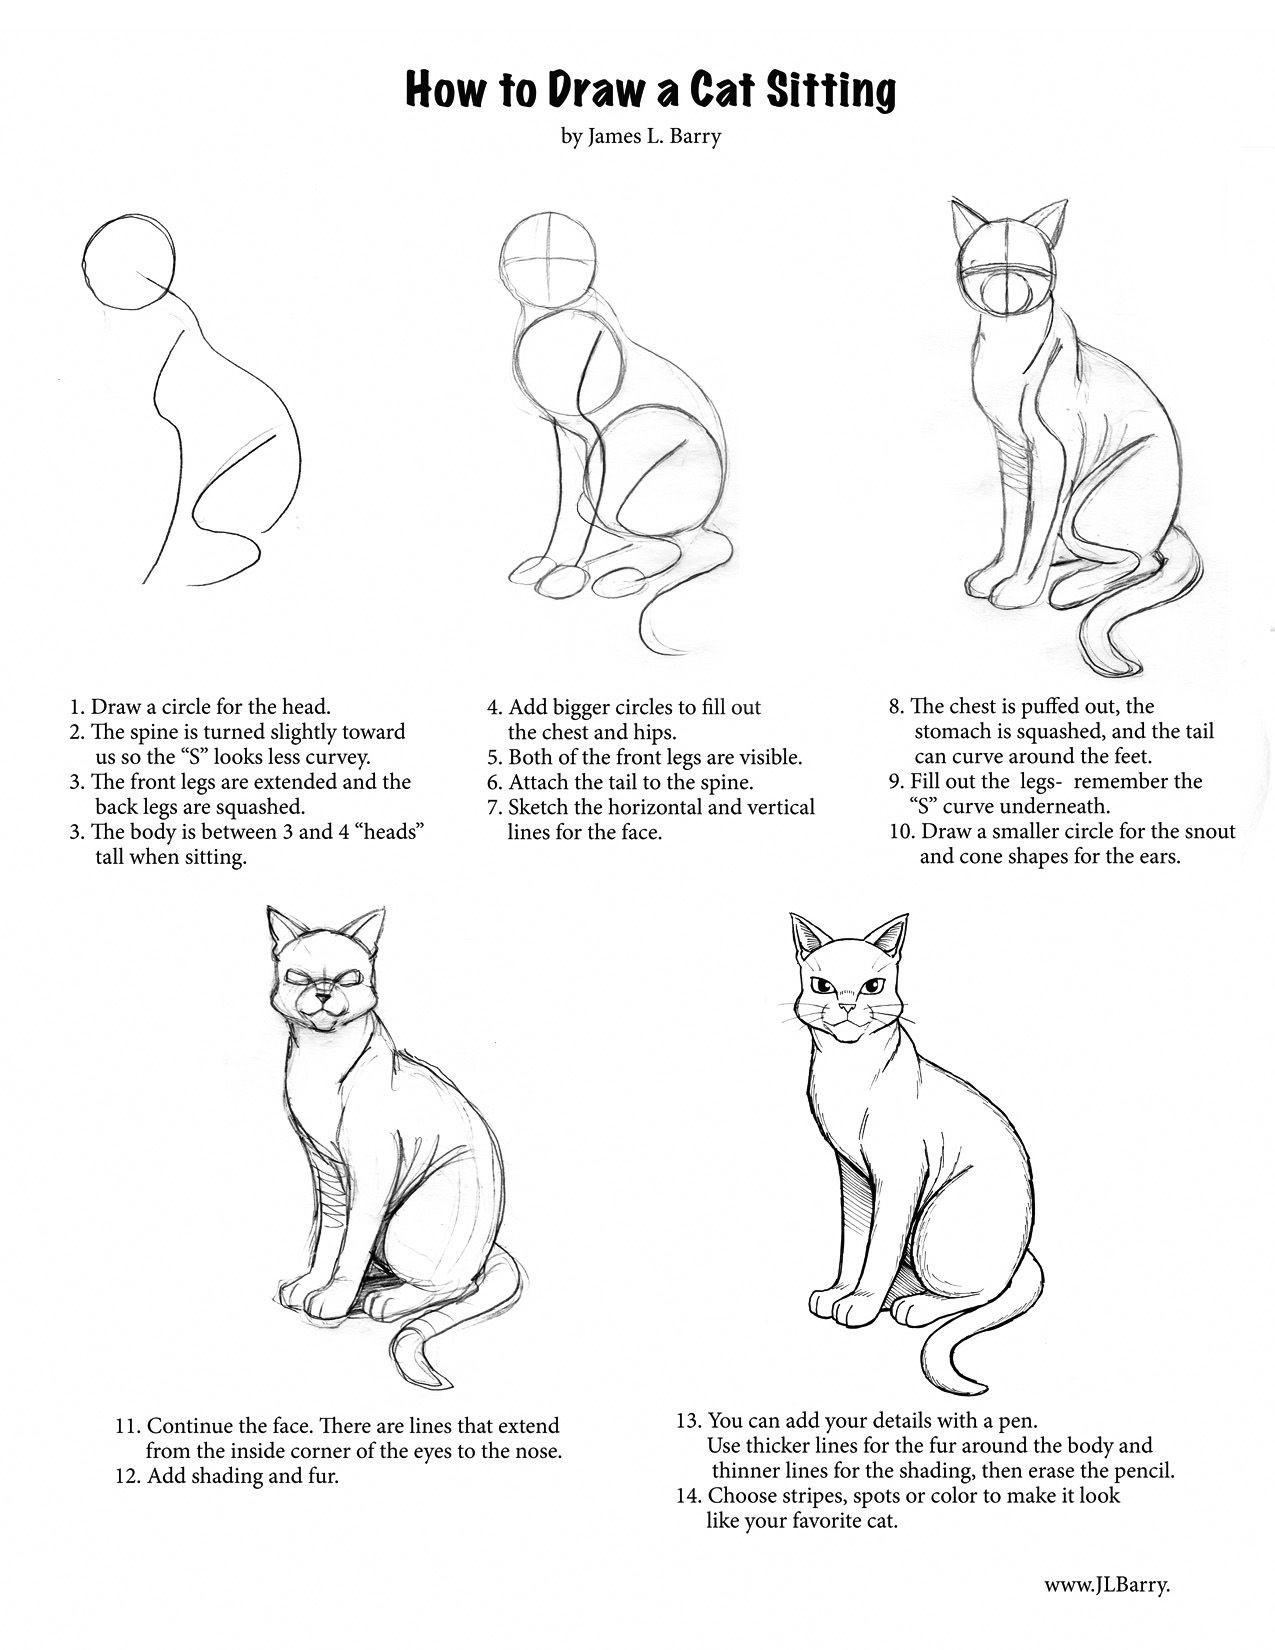 How To Draw A Cat Outline